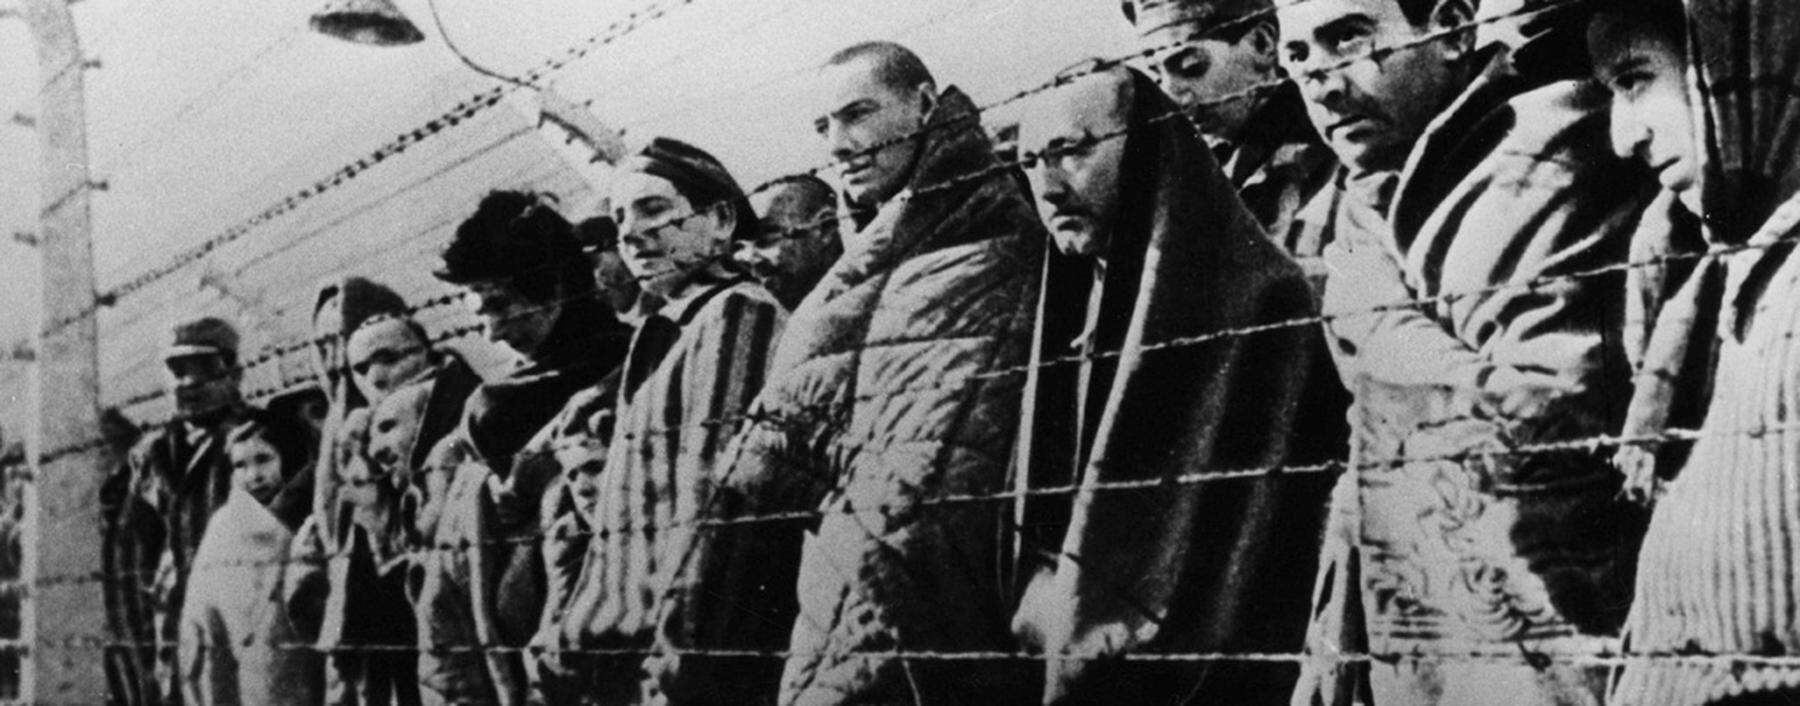 WW2 Oswiecim concentration camp prisoners freed by the Red Army in January 1945 Auschwitz Befre